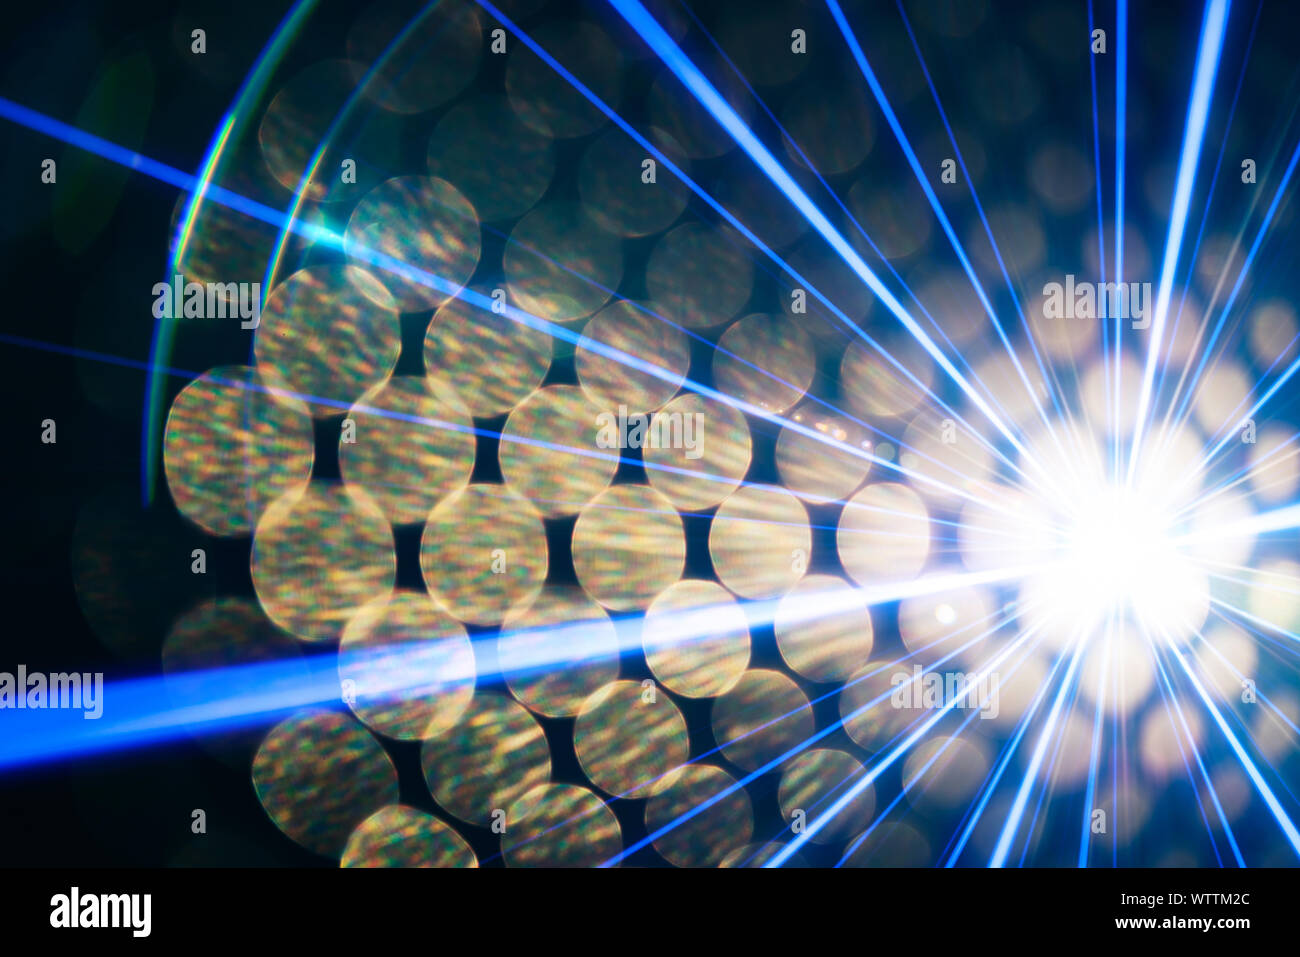 Abstract light beams, lasers, flares background Stock Photo